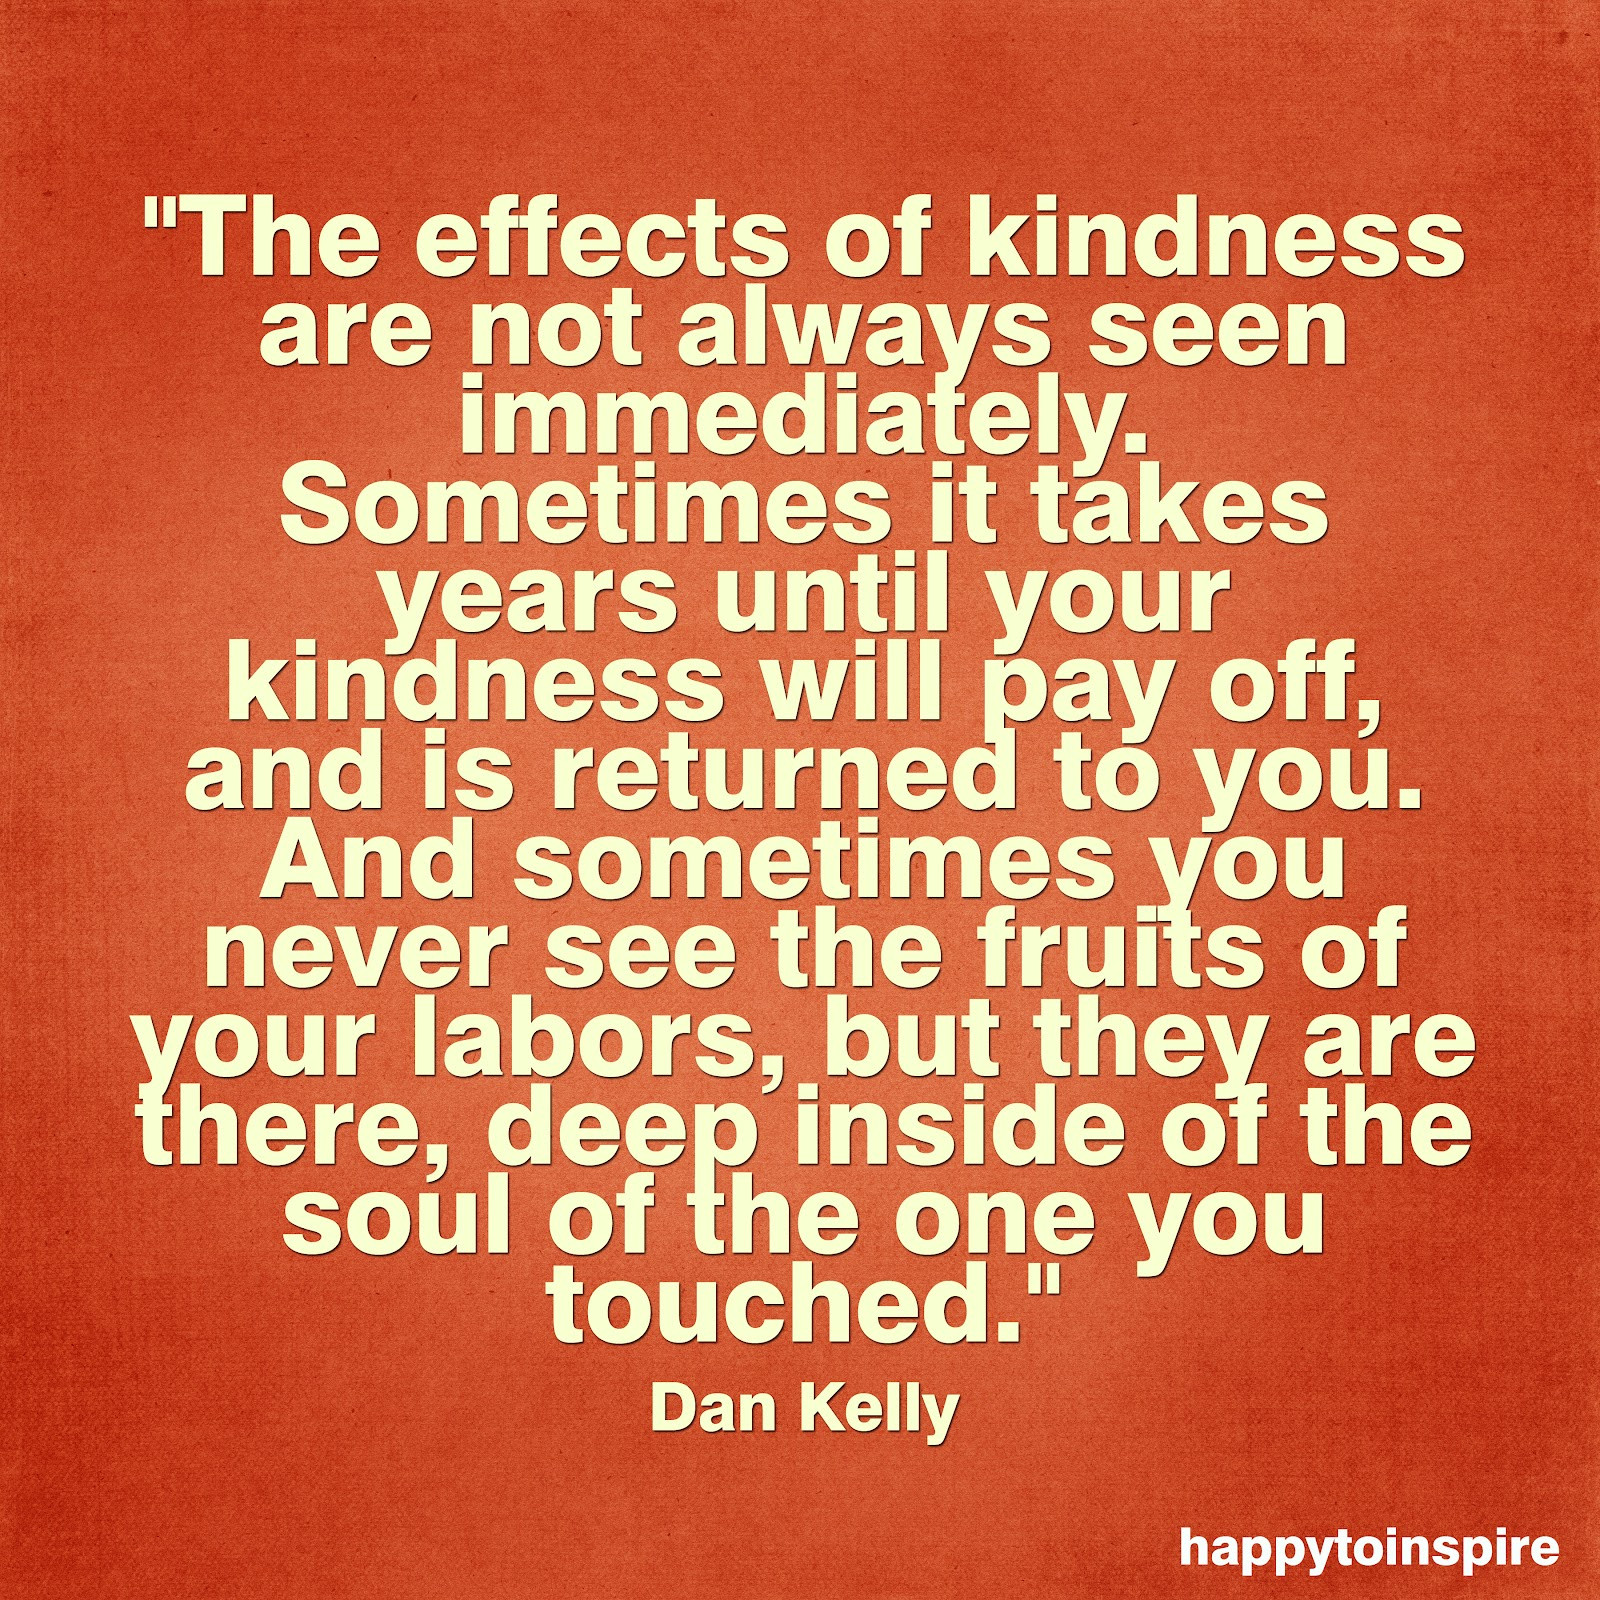 Quotes Of Kindness
 Happy To Inspire Quote of the Day The effects of